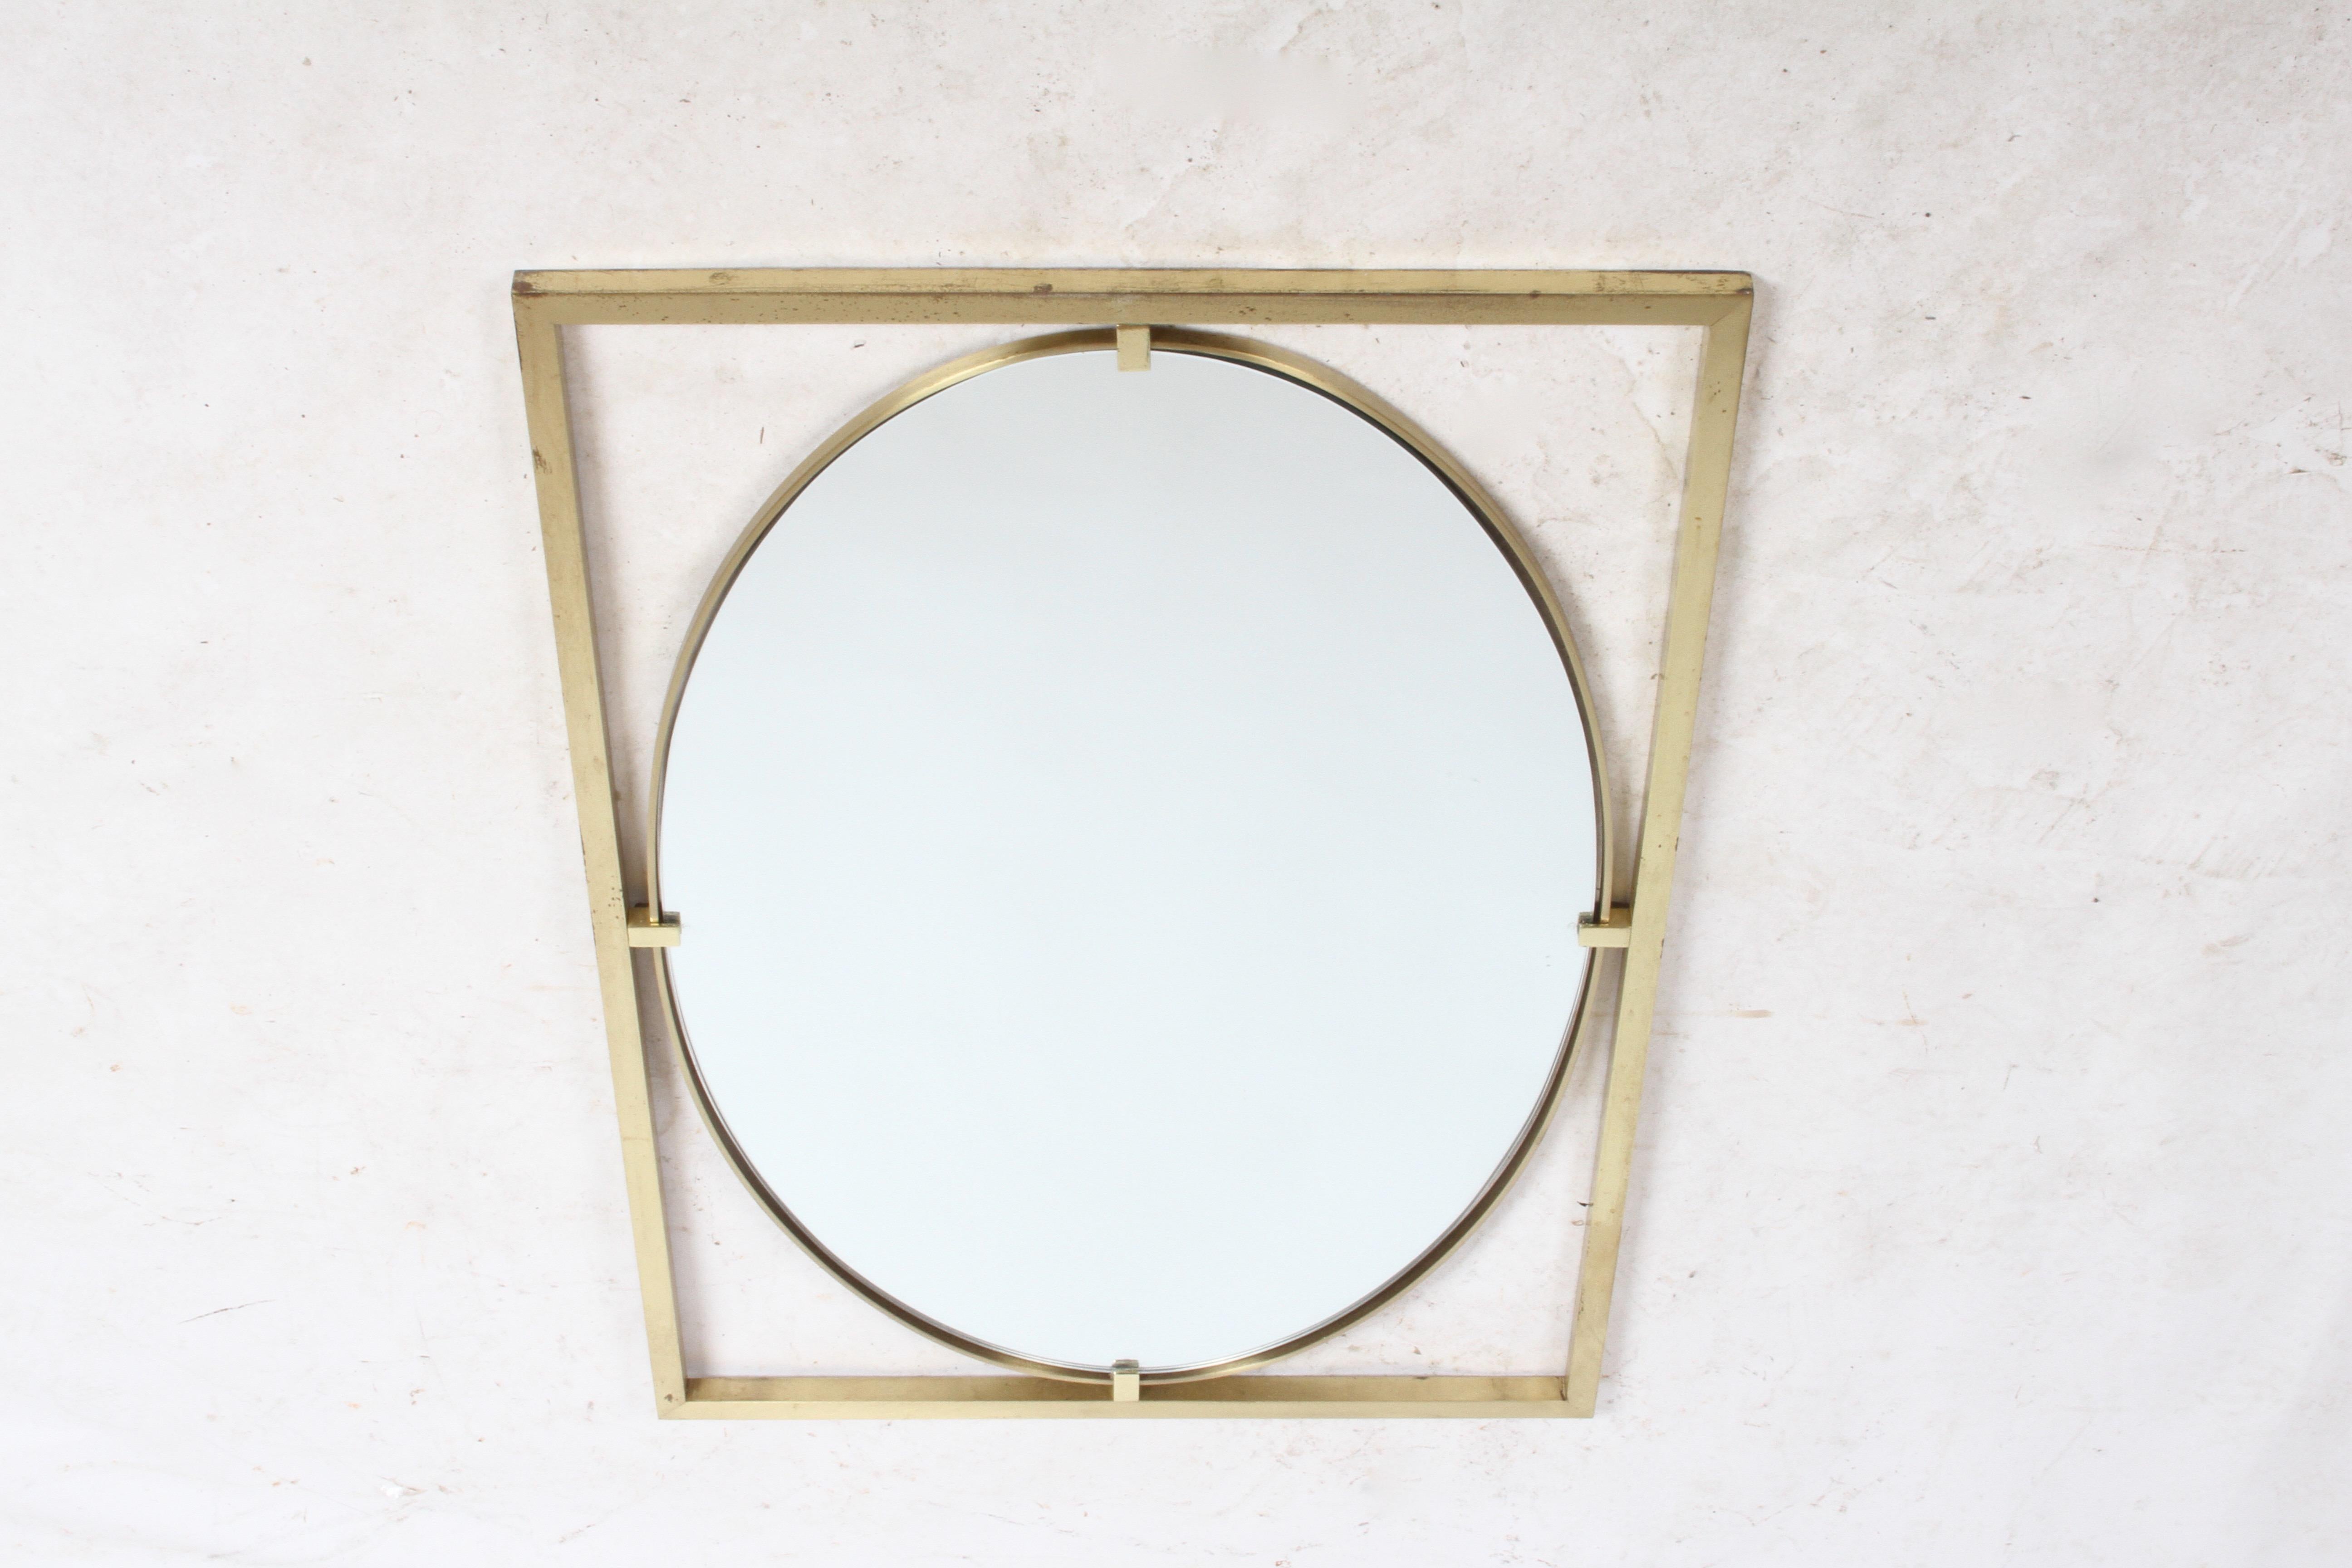 Oval mirror in the Hollywood Regency style by John Widdicomb, circa 1960s. Rectangle brass frame with oval mirror and brass edge. Shown with original patina, can be polished. No label. In the style of Mastercraft.